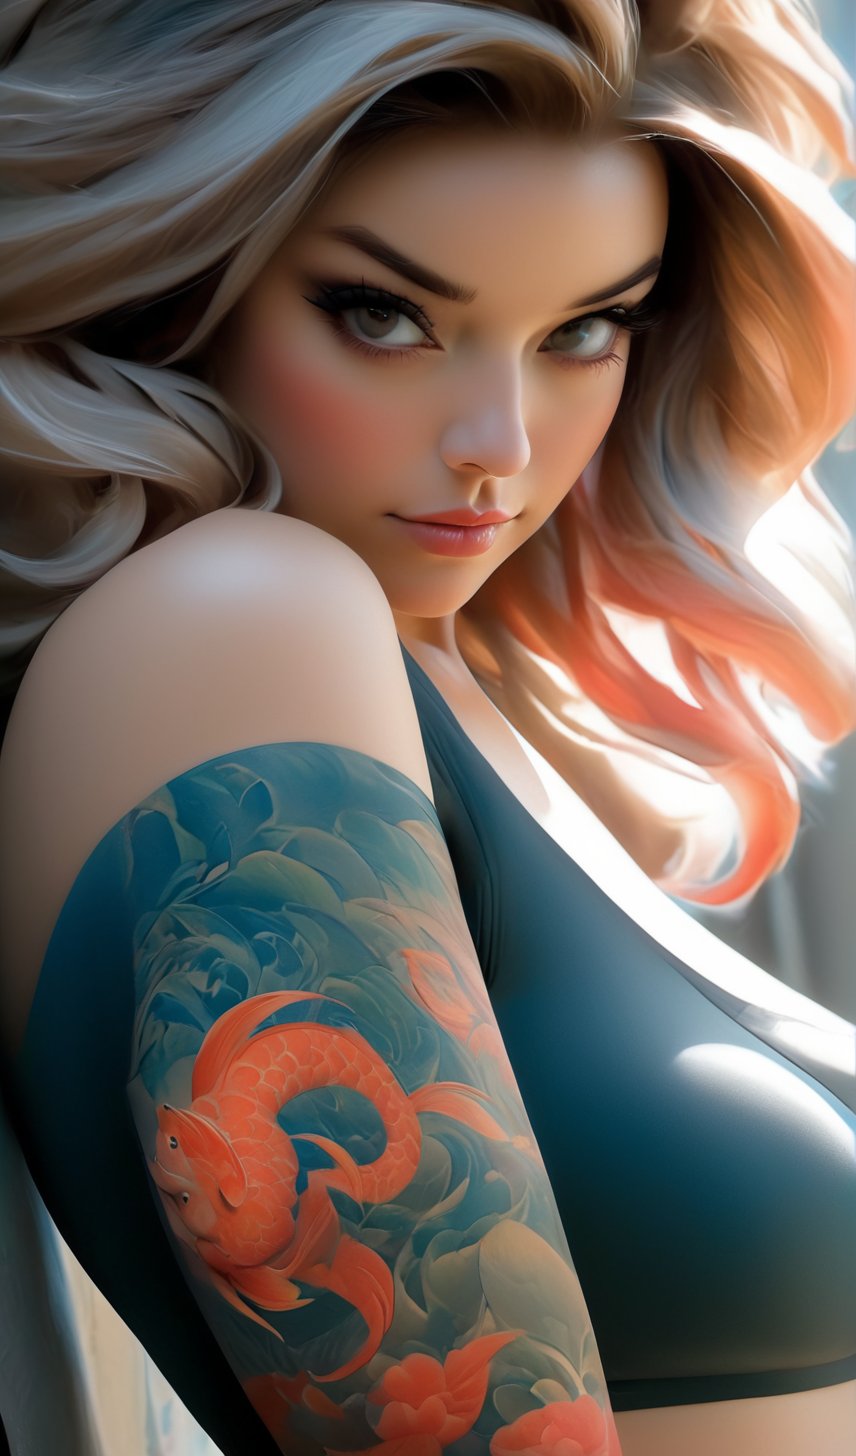 a close up of a woman with tattoos on her arms and legs, beautiful character painting, artgerm and james jean, masayoshi suto and artgerm, artgerm and ruan jia, ruan jia and artgerm, chris moore. artgerm, artgerm and ilya kushinov, artgerm. anime illustration, 